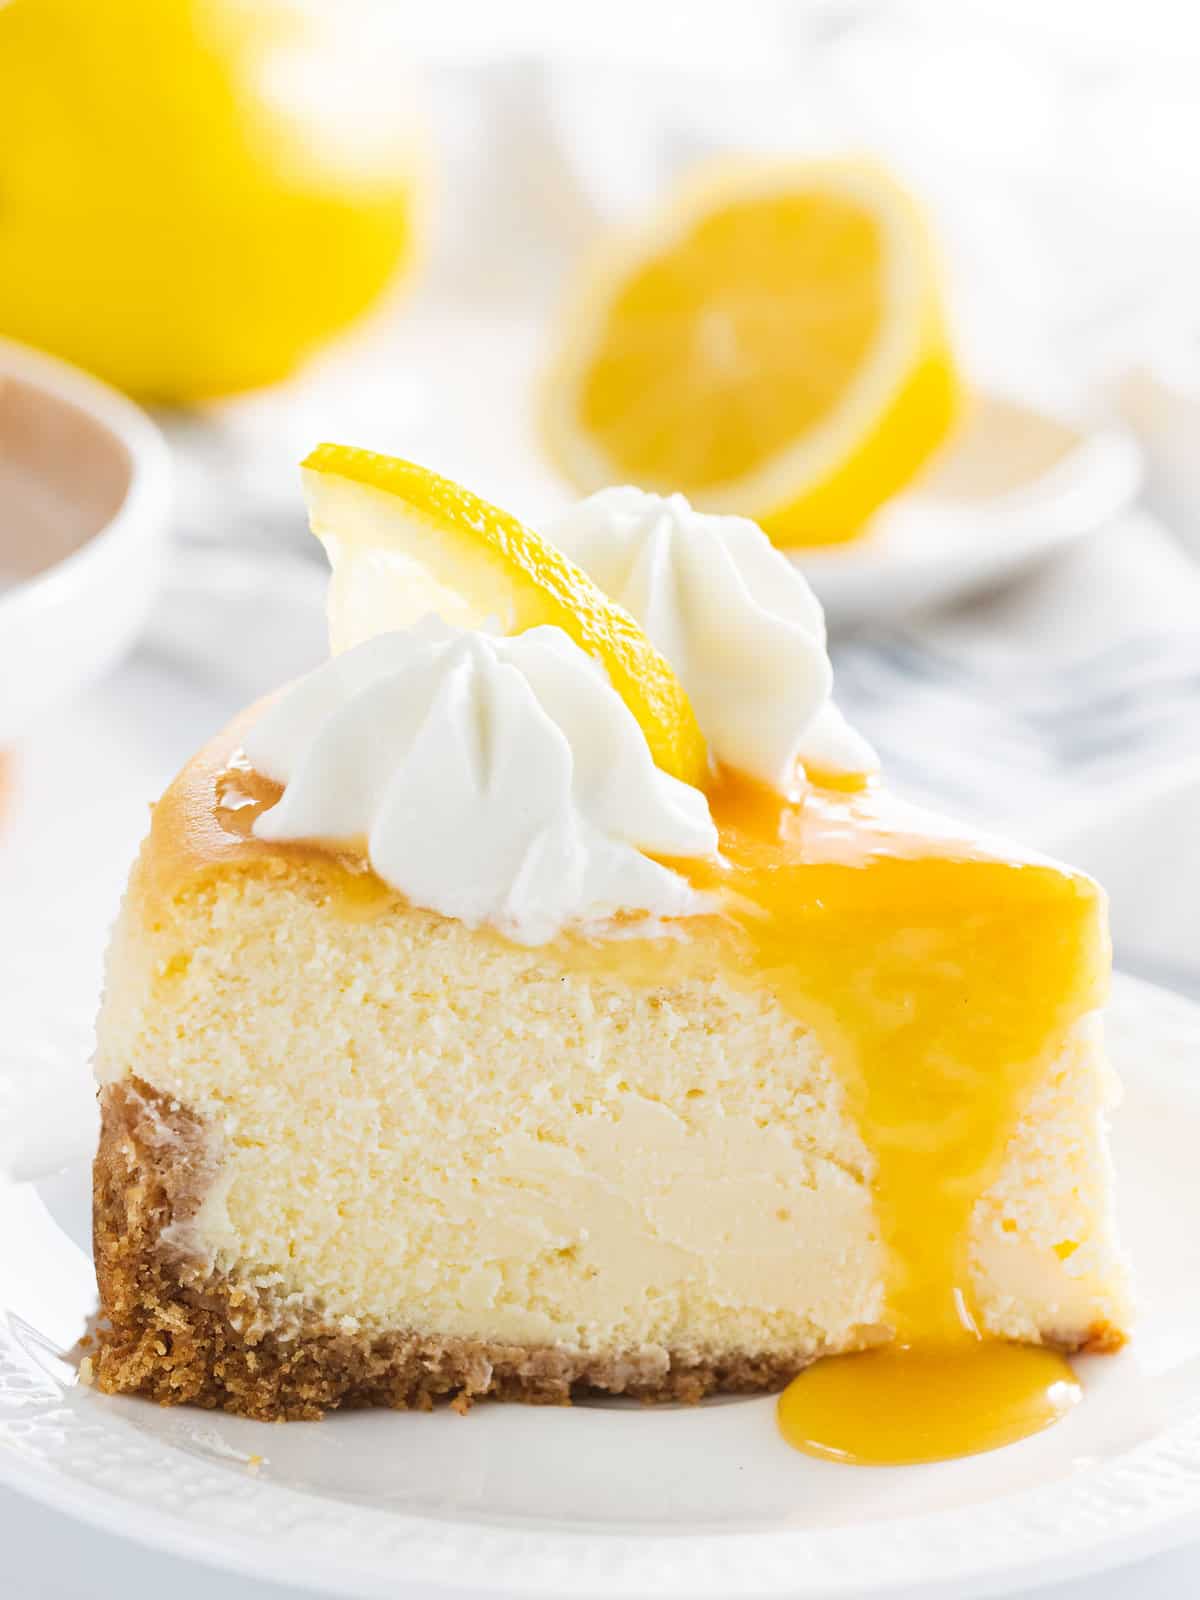 A slice of lemon cheesecake topped with lemon curd and lemon slices.